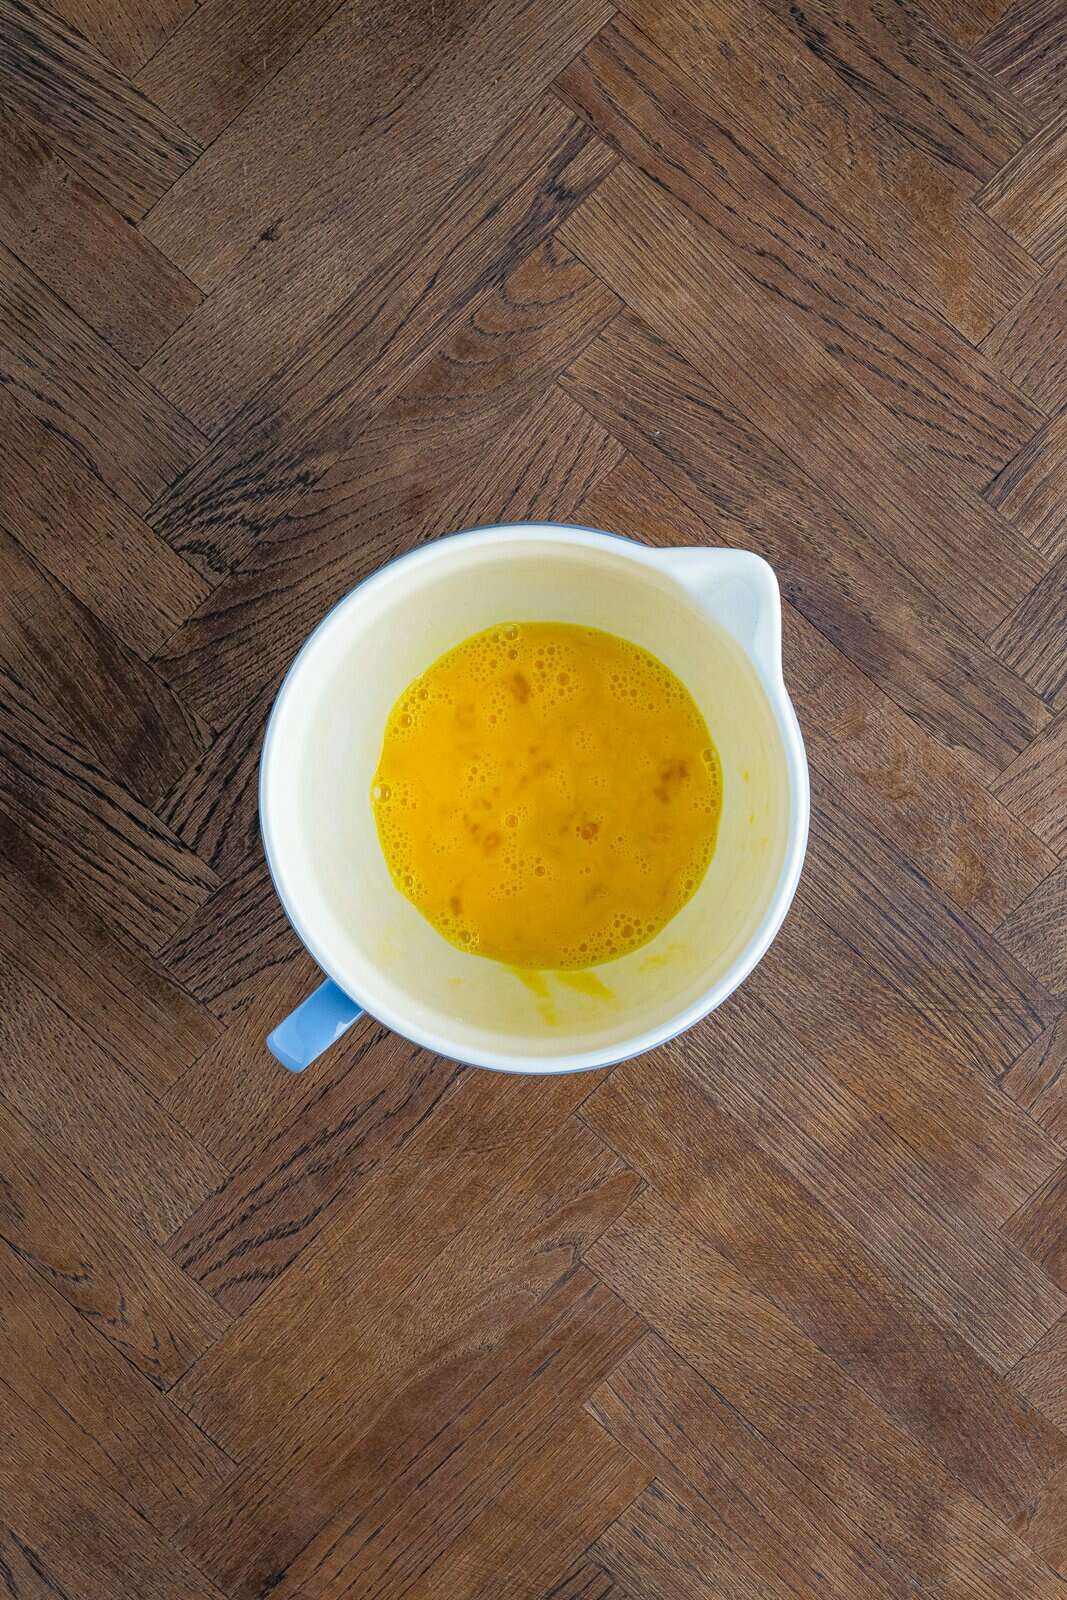 Eggs whisked together in bowl.